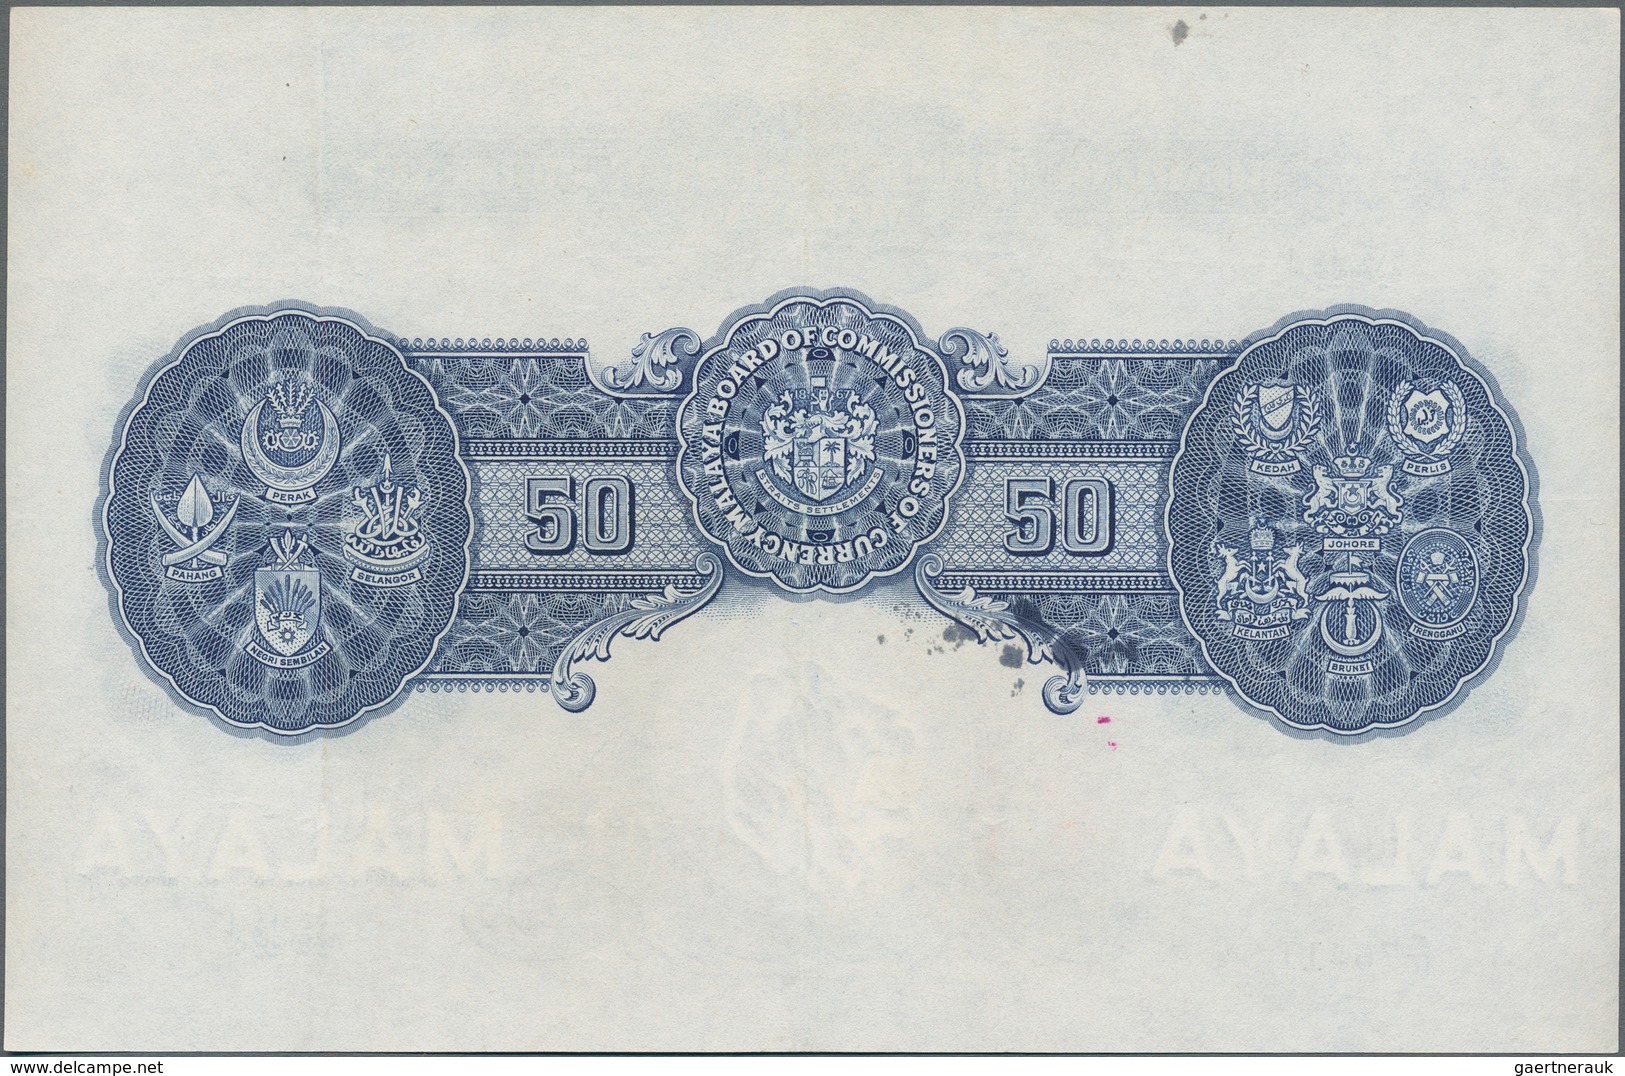 Malaya: Board Of Commissioners Of Currency 50 Dollars January 1st 1942, P.14, Extraordinary Rare Ban - Malaysia